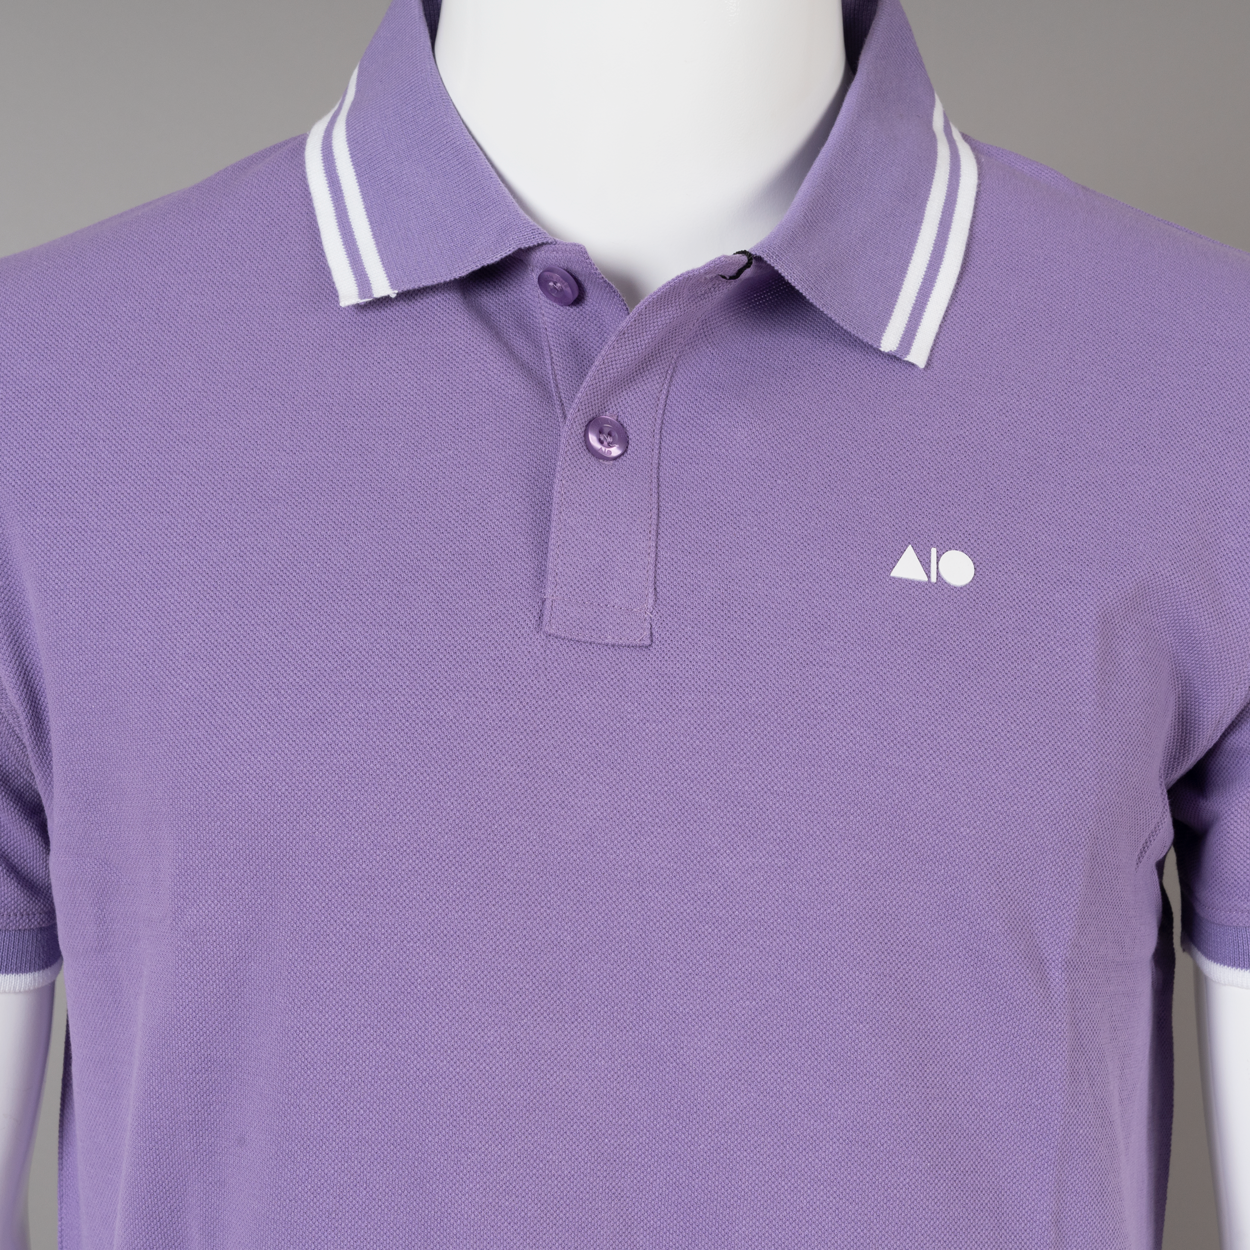 Mens Tipping Polo Shirt - Combo (Purple, Skyway & Forest Green)